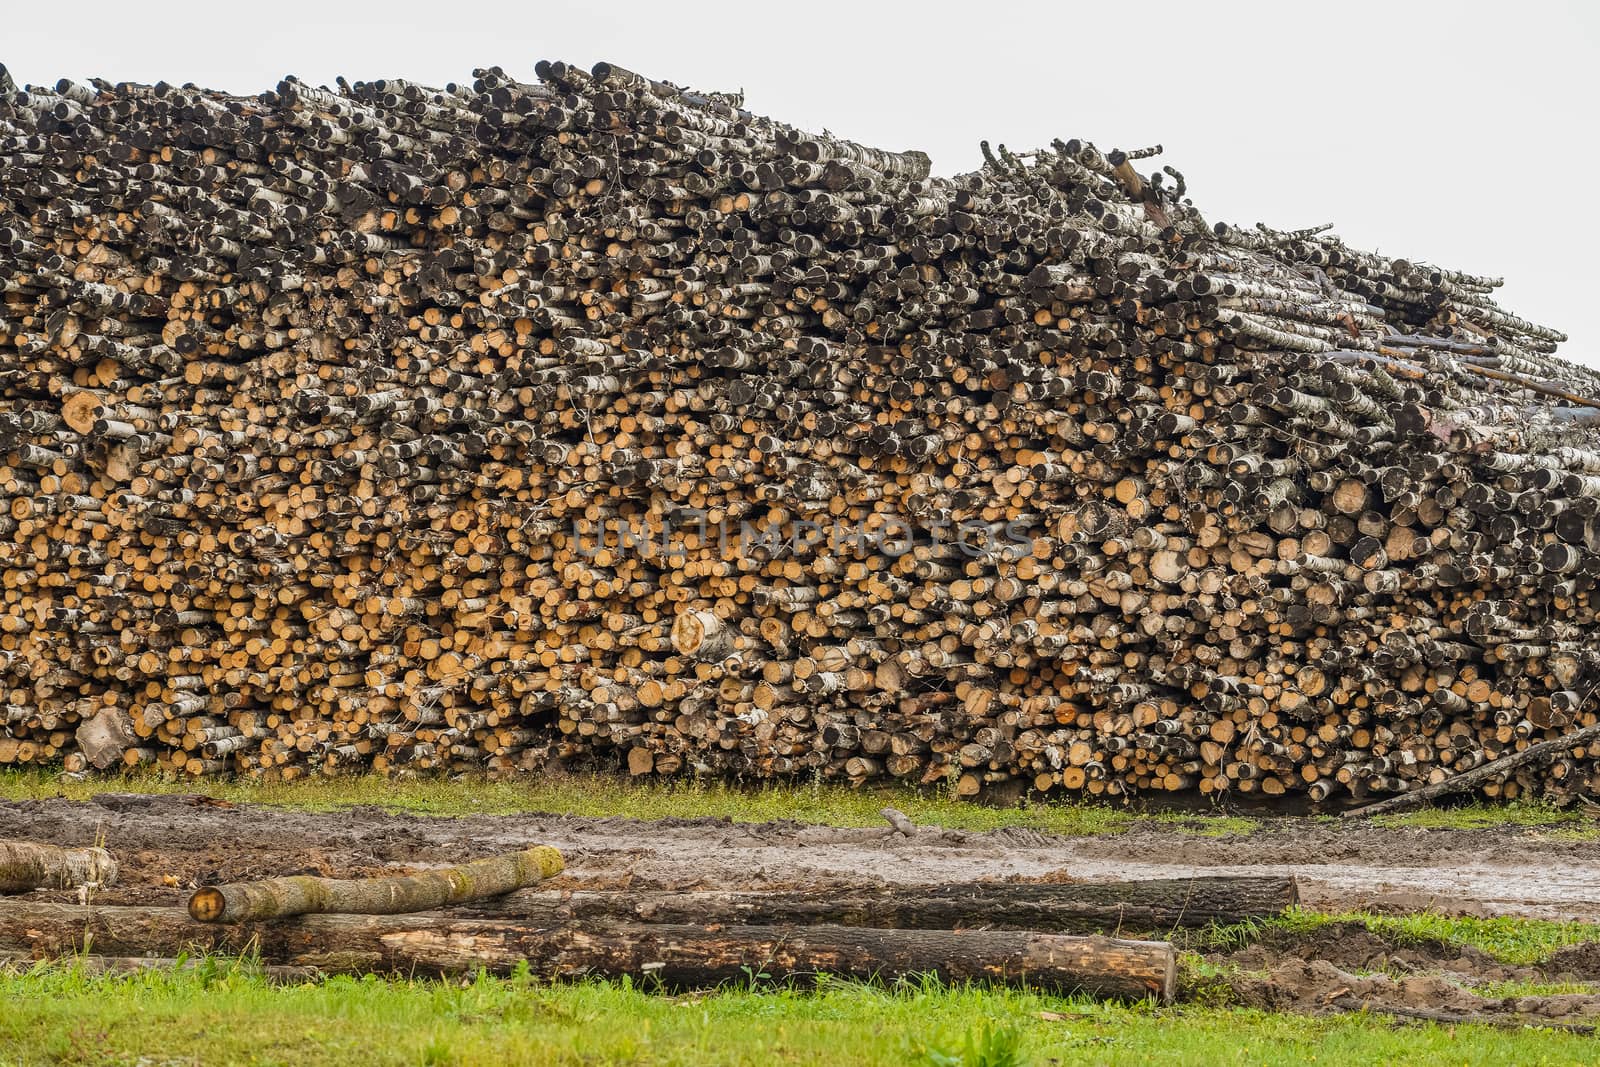 A pile of logs. Stack. Logs prepared for processing at a sawmill.